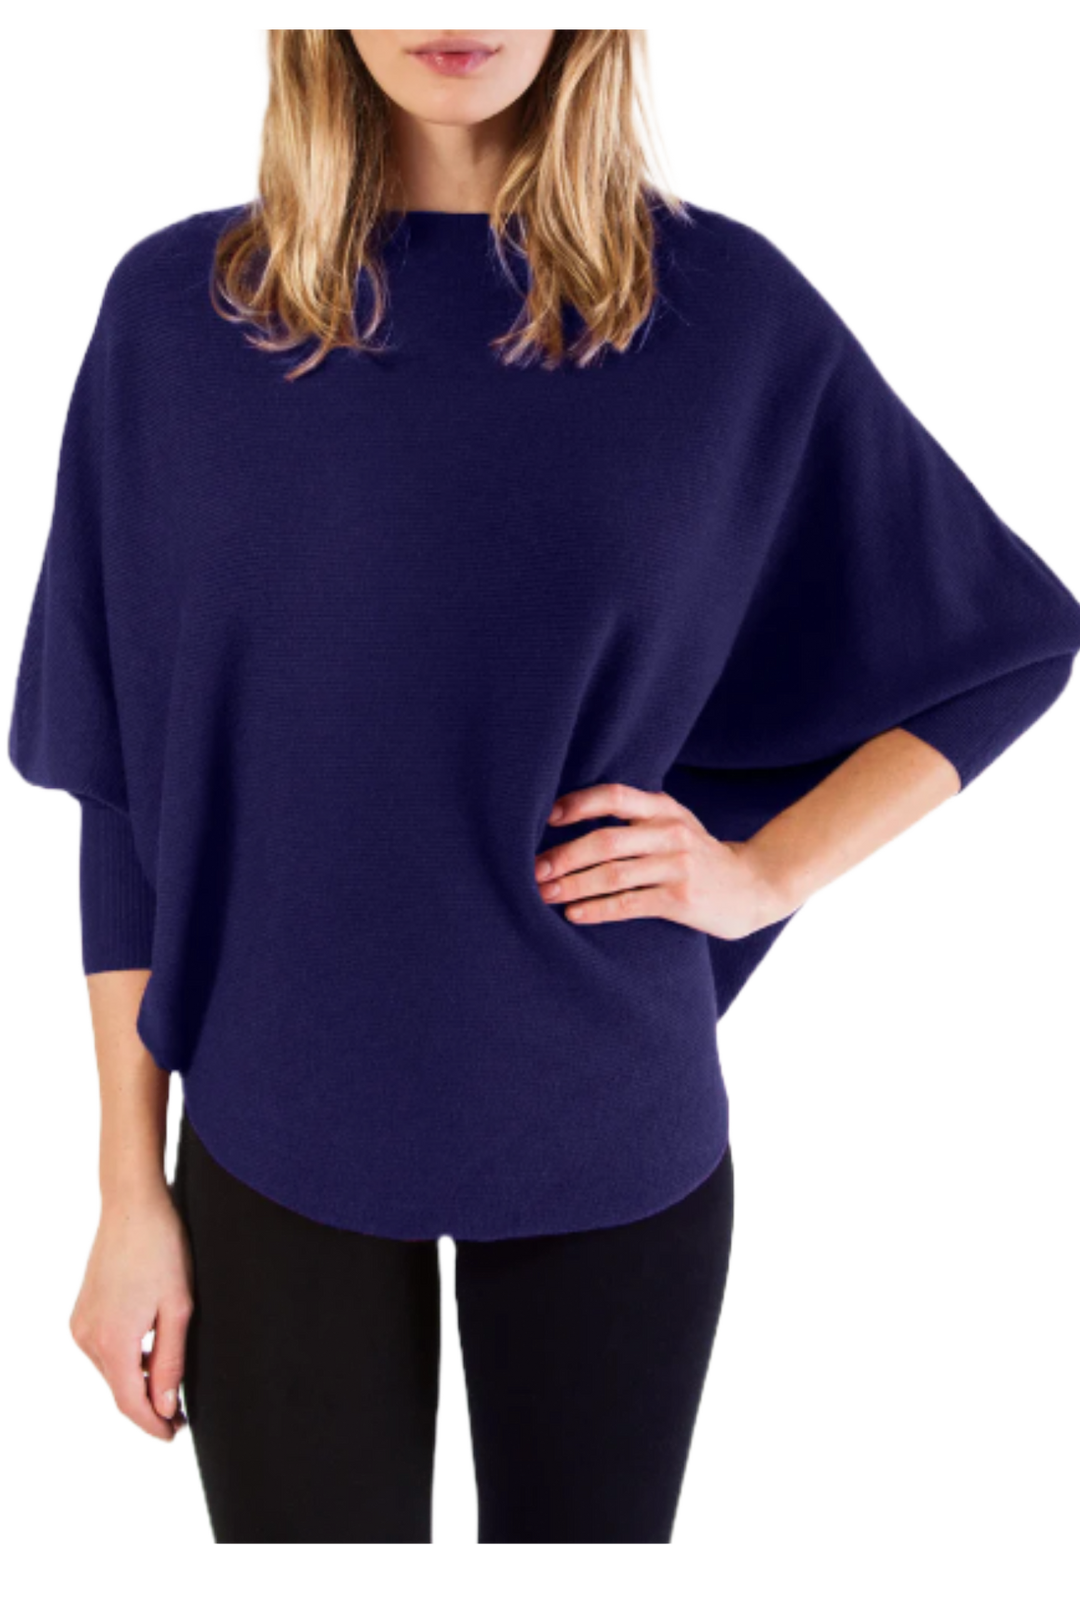 The Presley Sweater- Navy